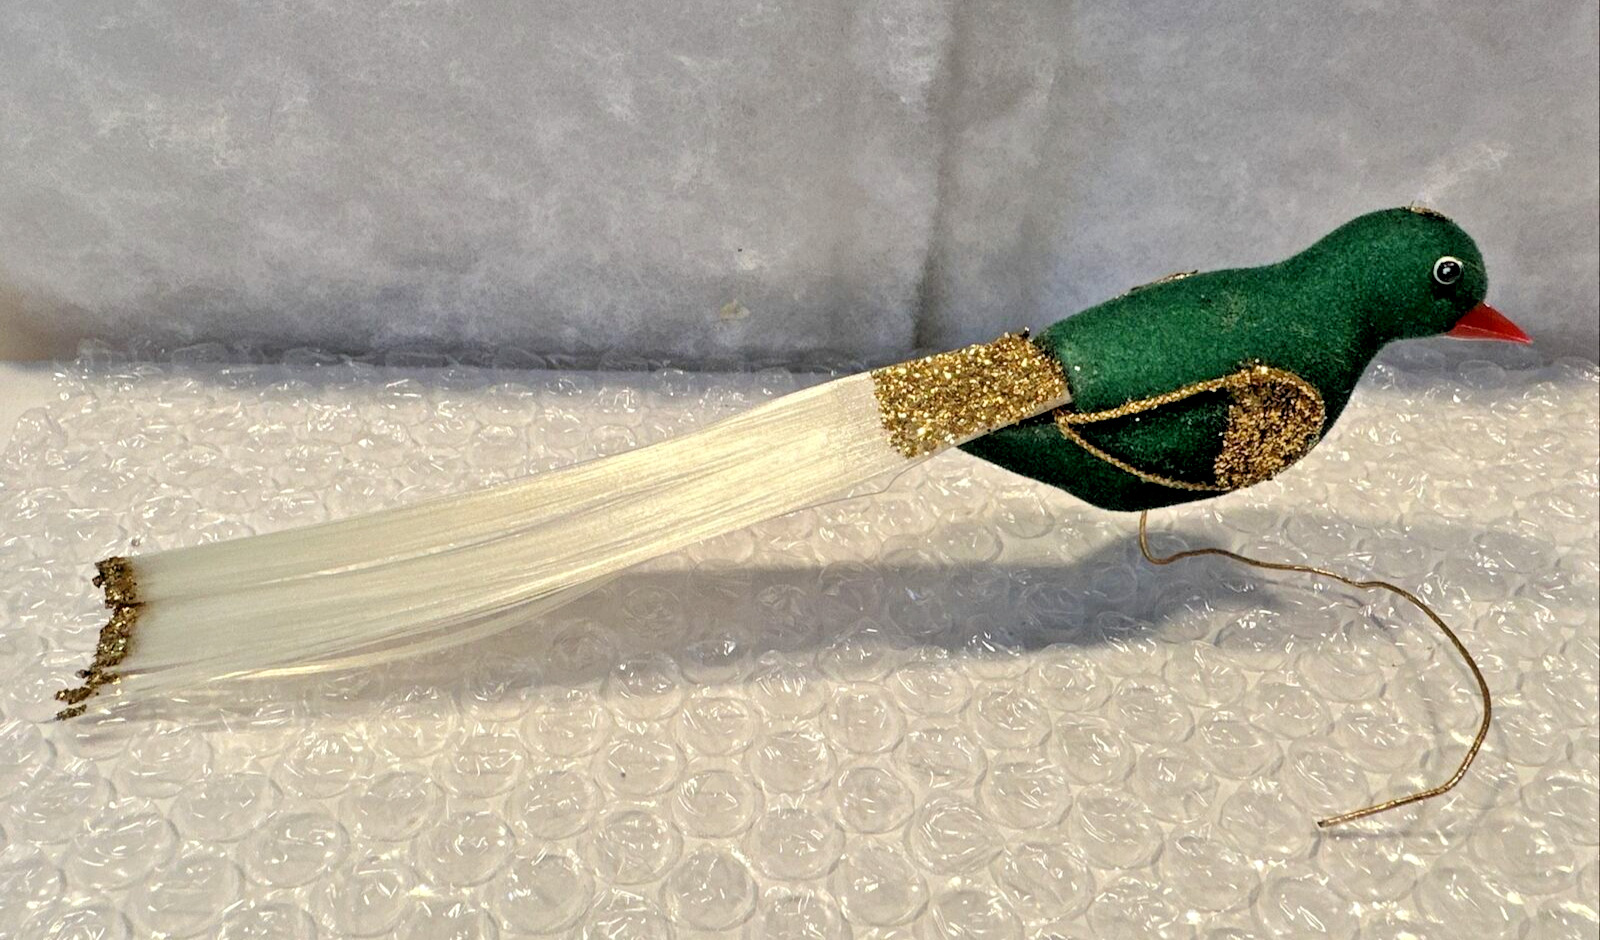 Vintage 1960s Rare Green Flocked Bird with Spun Tail 7” Ornament - Made In Japan